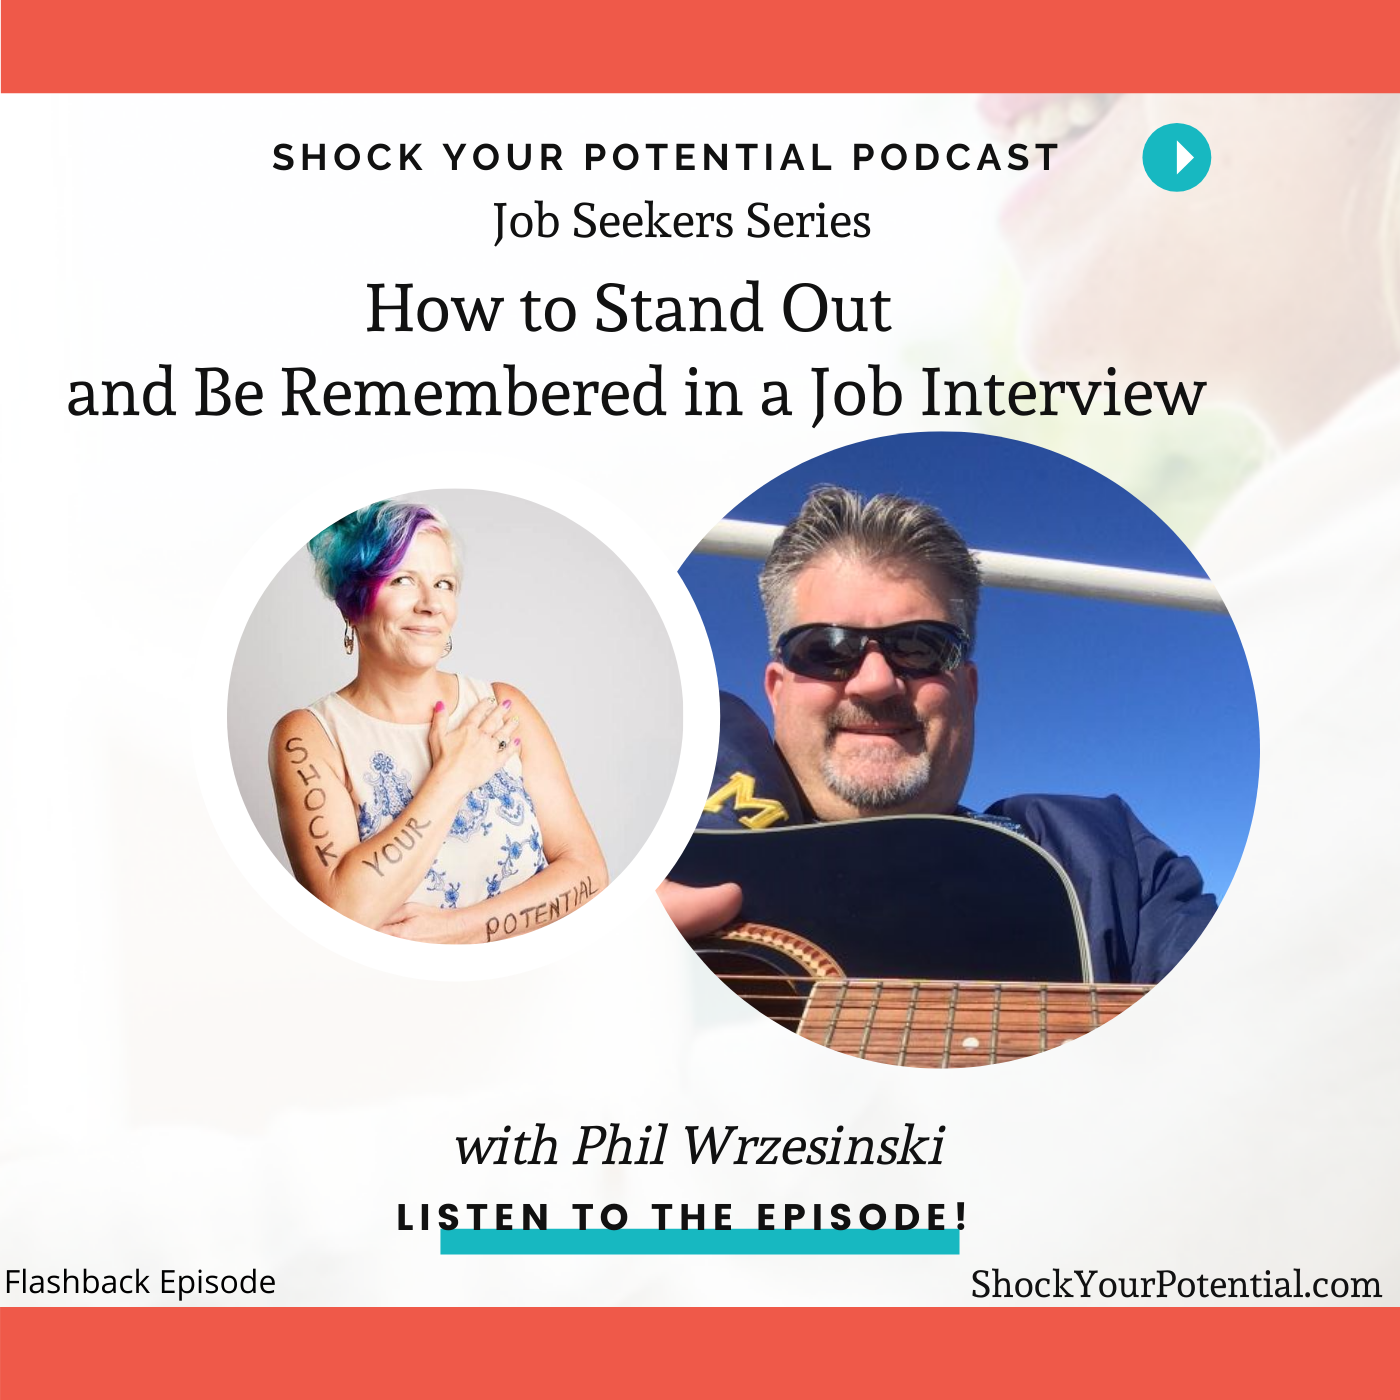 How to Stand Out and Be Remembered in a Job Interview – Phil Wrzesinski